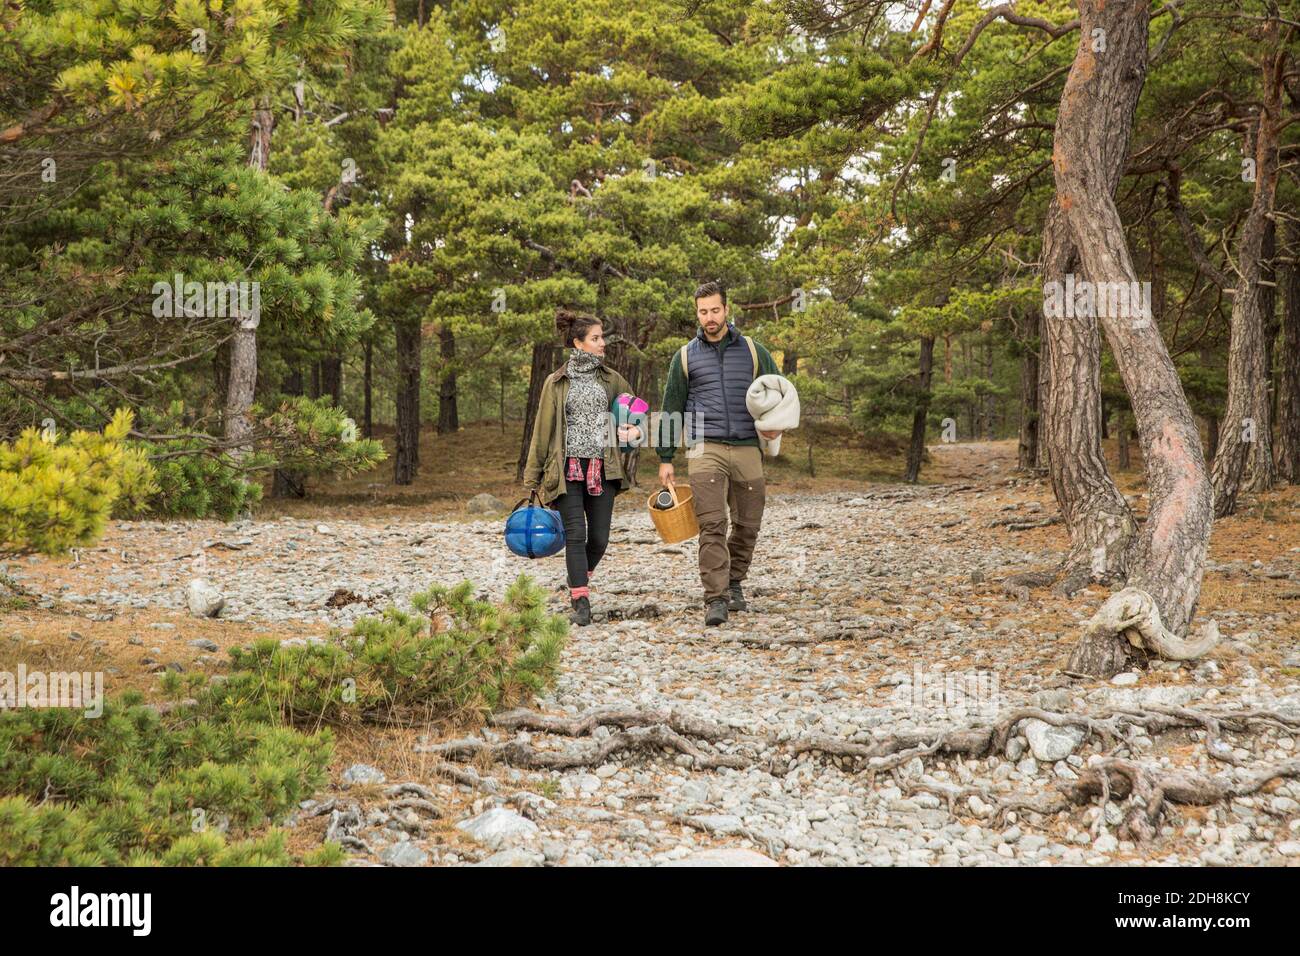 Couple carrying sleeping bags and basket in forest Stock Photo